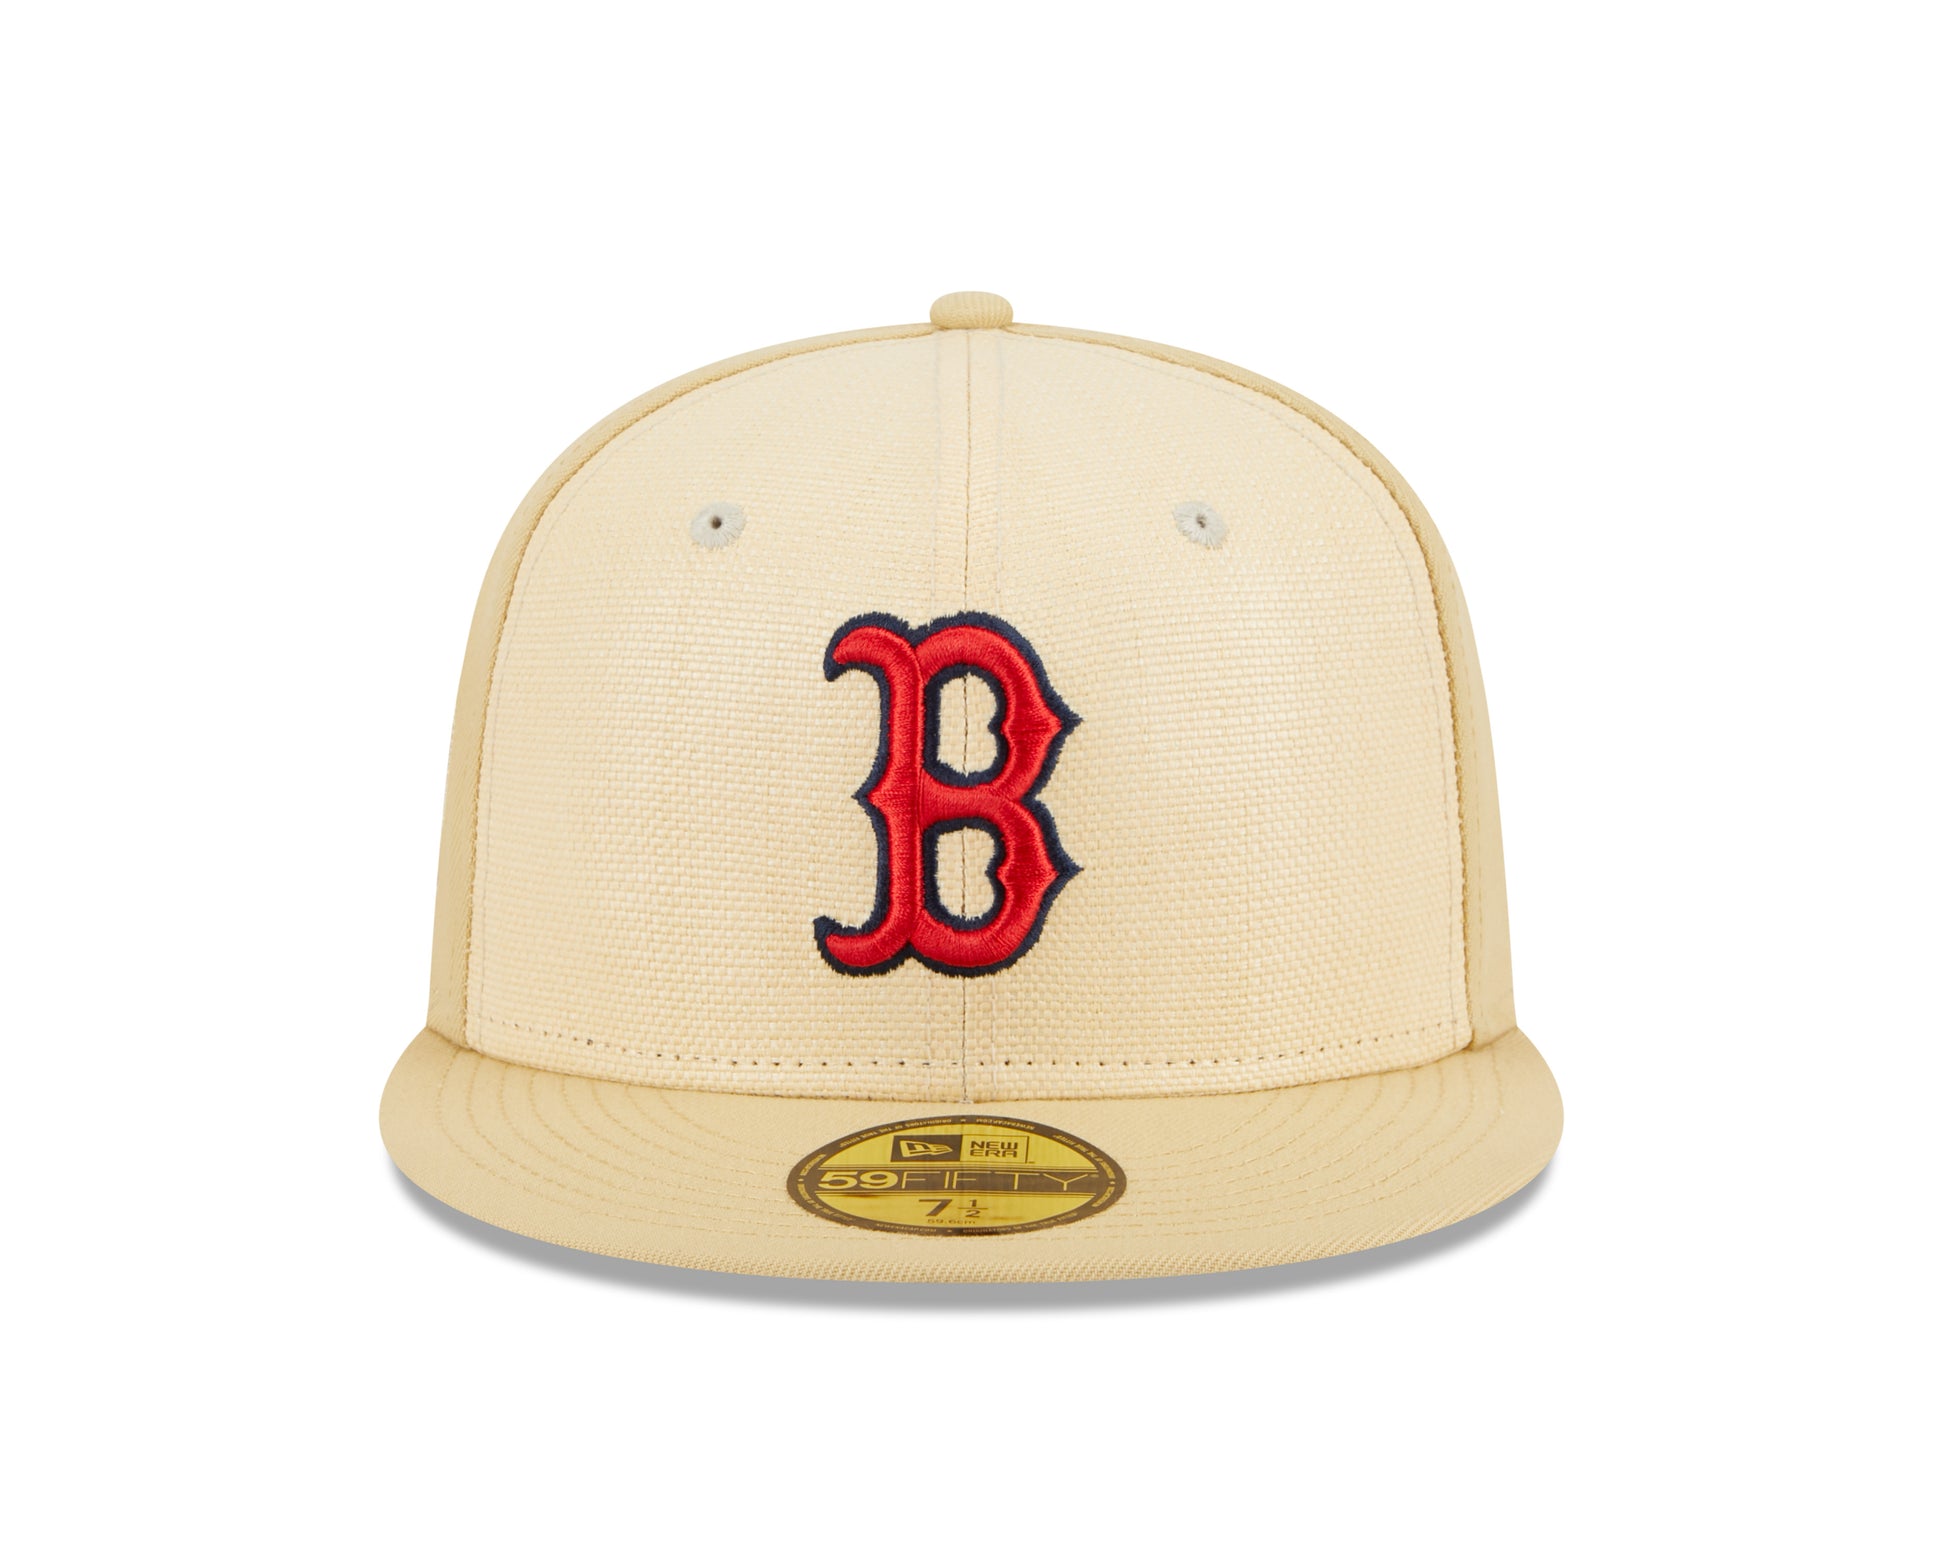 New Era - 59Fifty Fitted Cap - RAFFIA FRONT - Boston Red Sox - Sand - Headz Up 